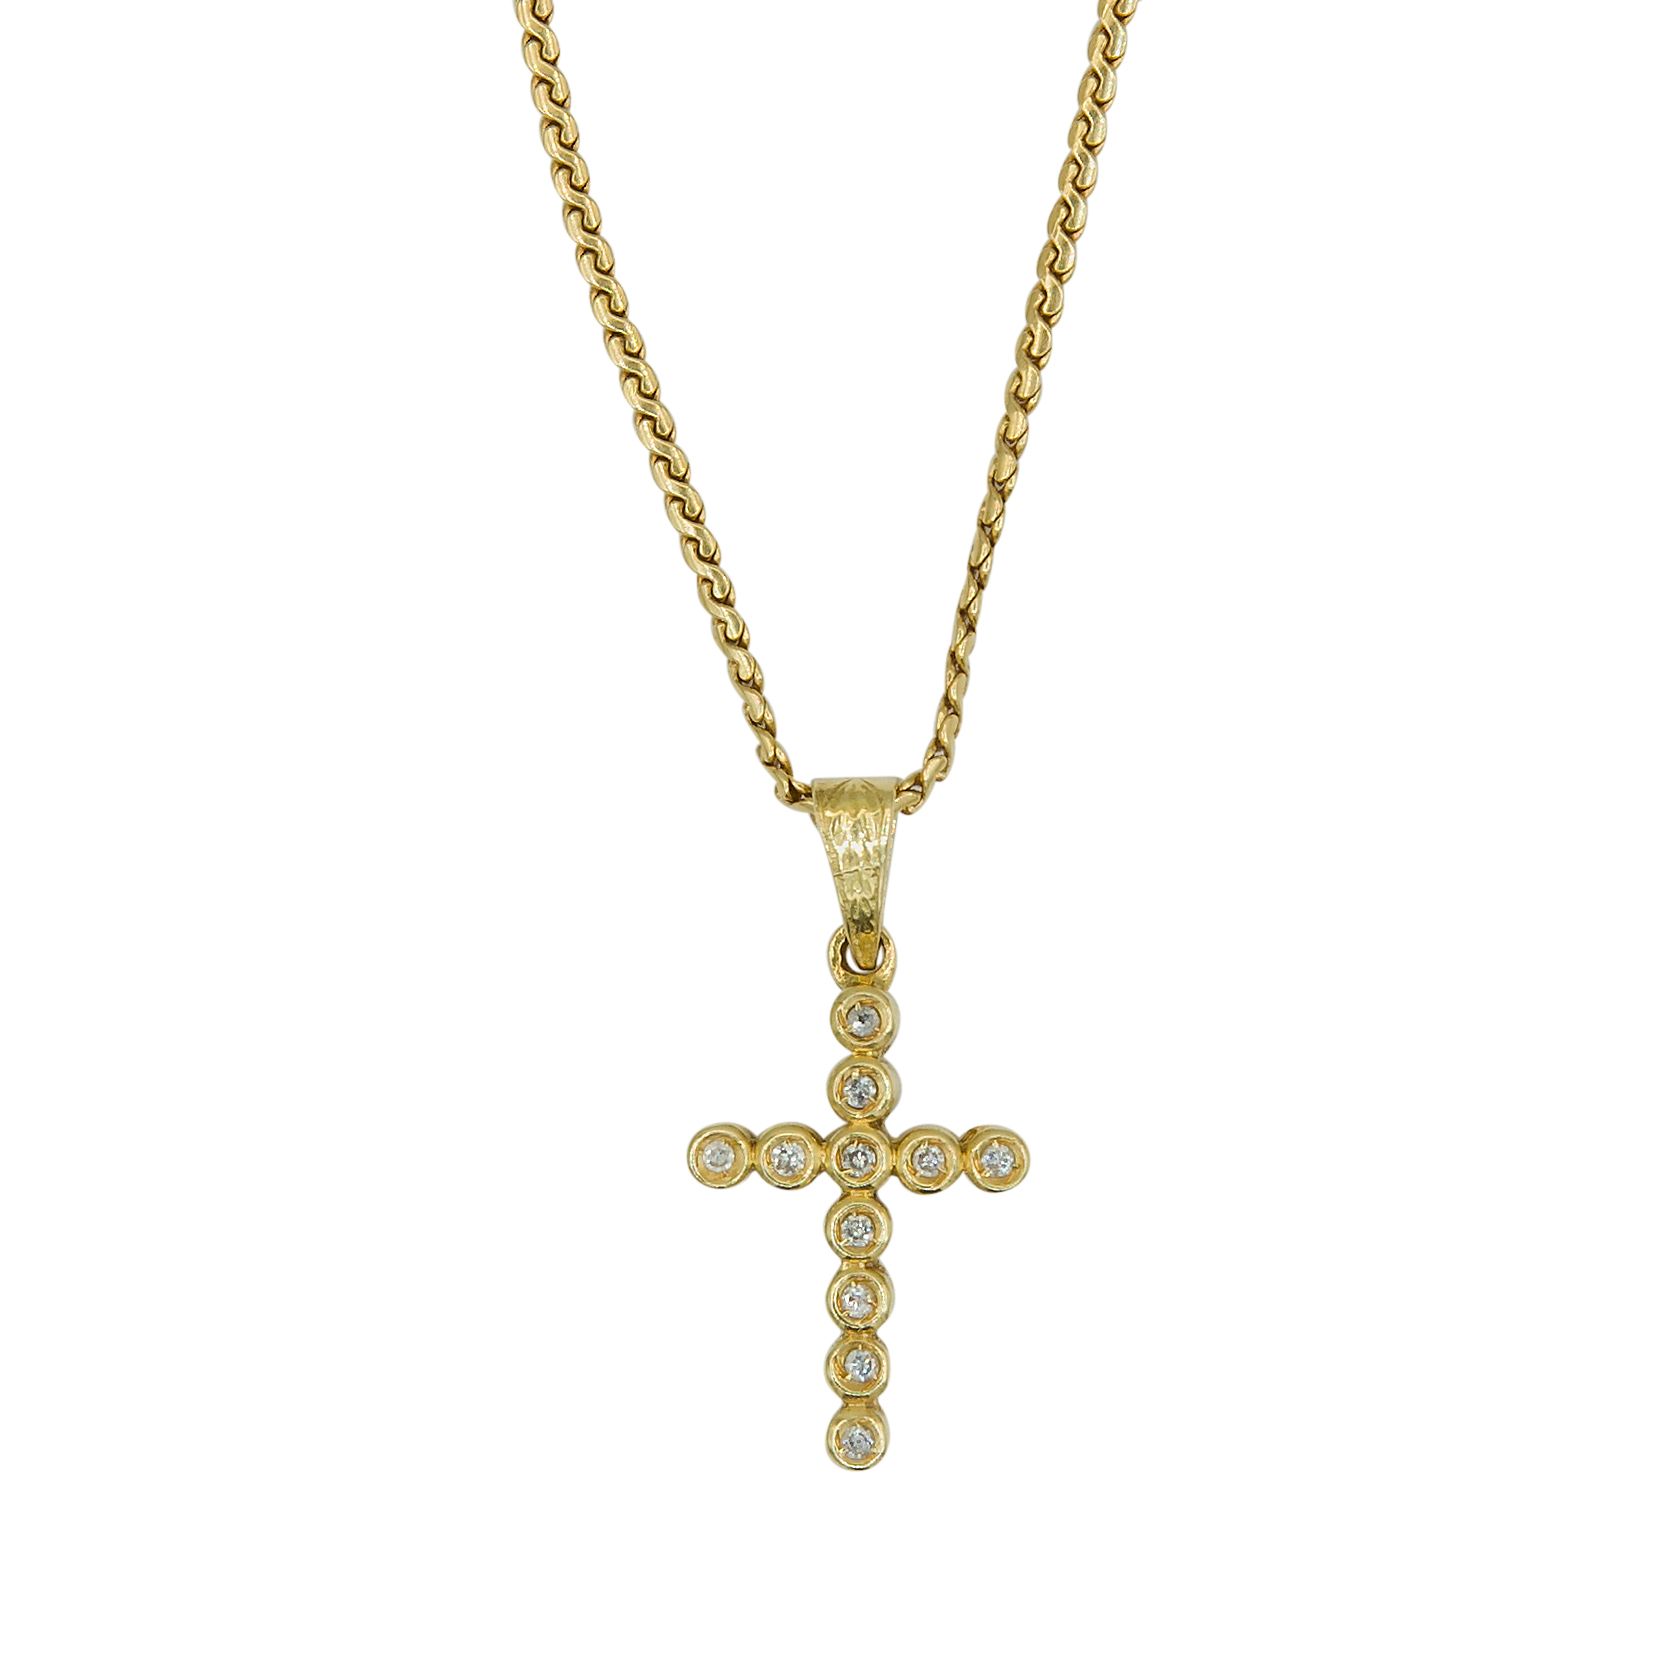 Null 18kt yellow gold necklace with cross pendant. Pendant with 11 diamonds, wei&hellip;